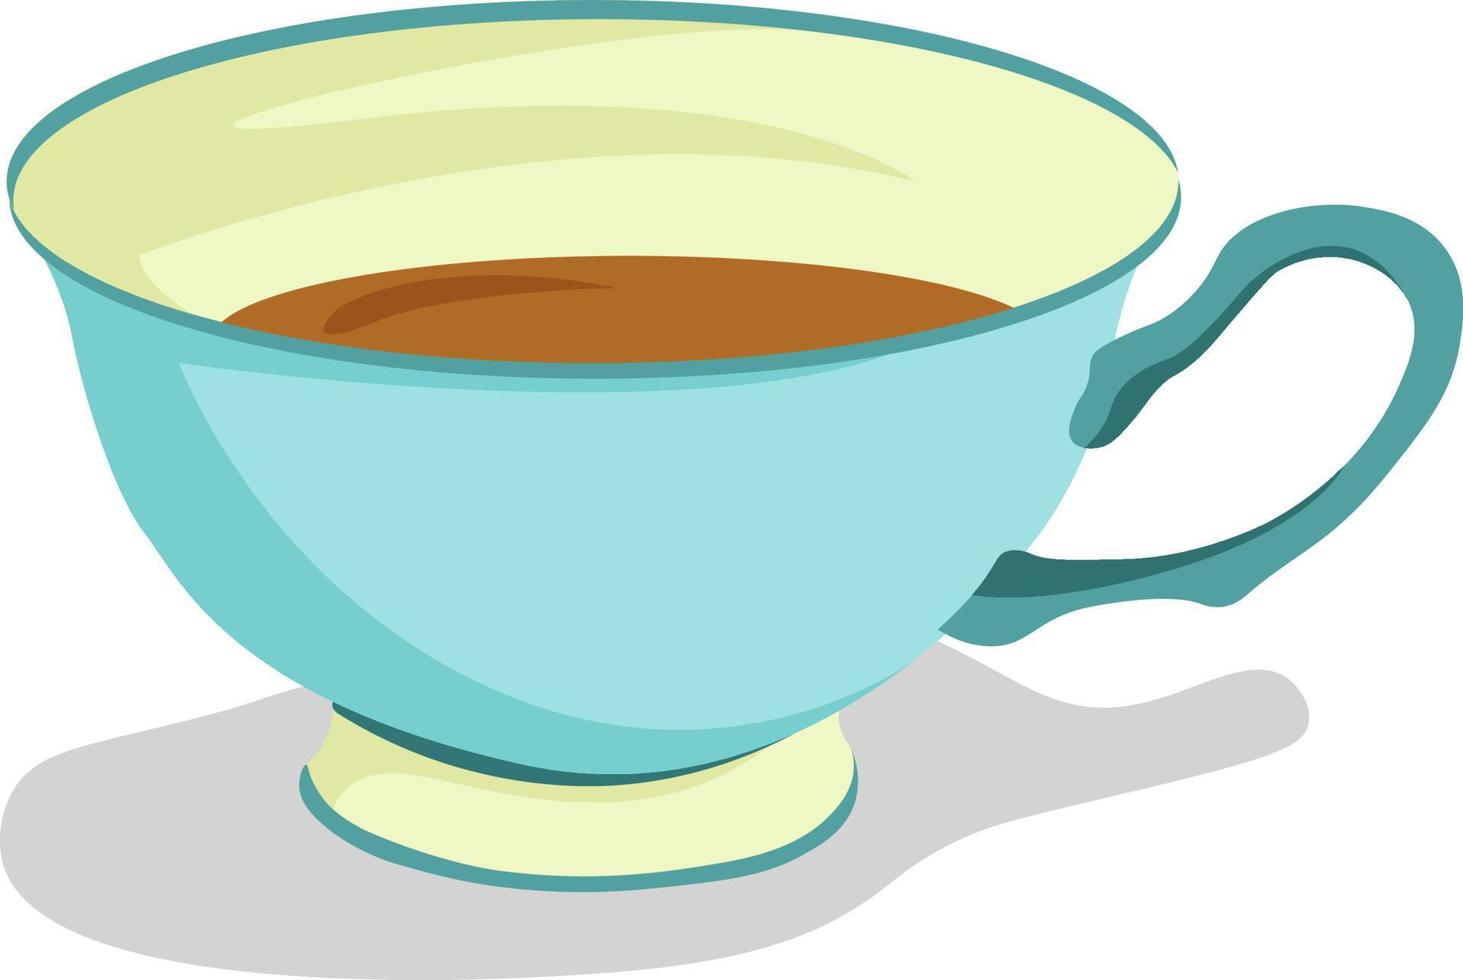 Tea cup, illustration, vector on white background